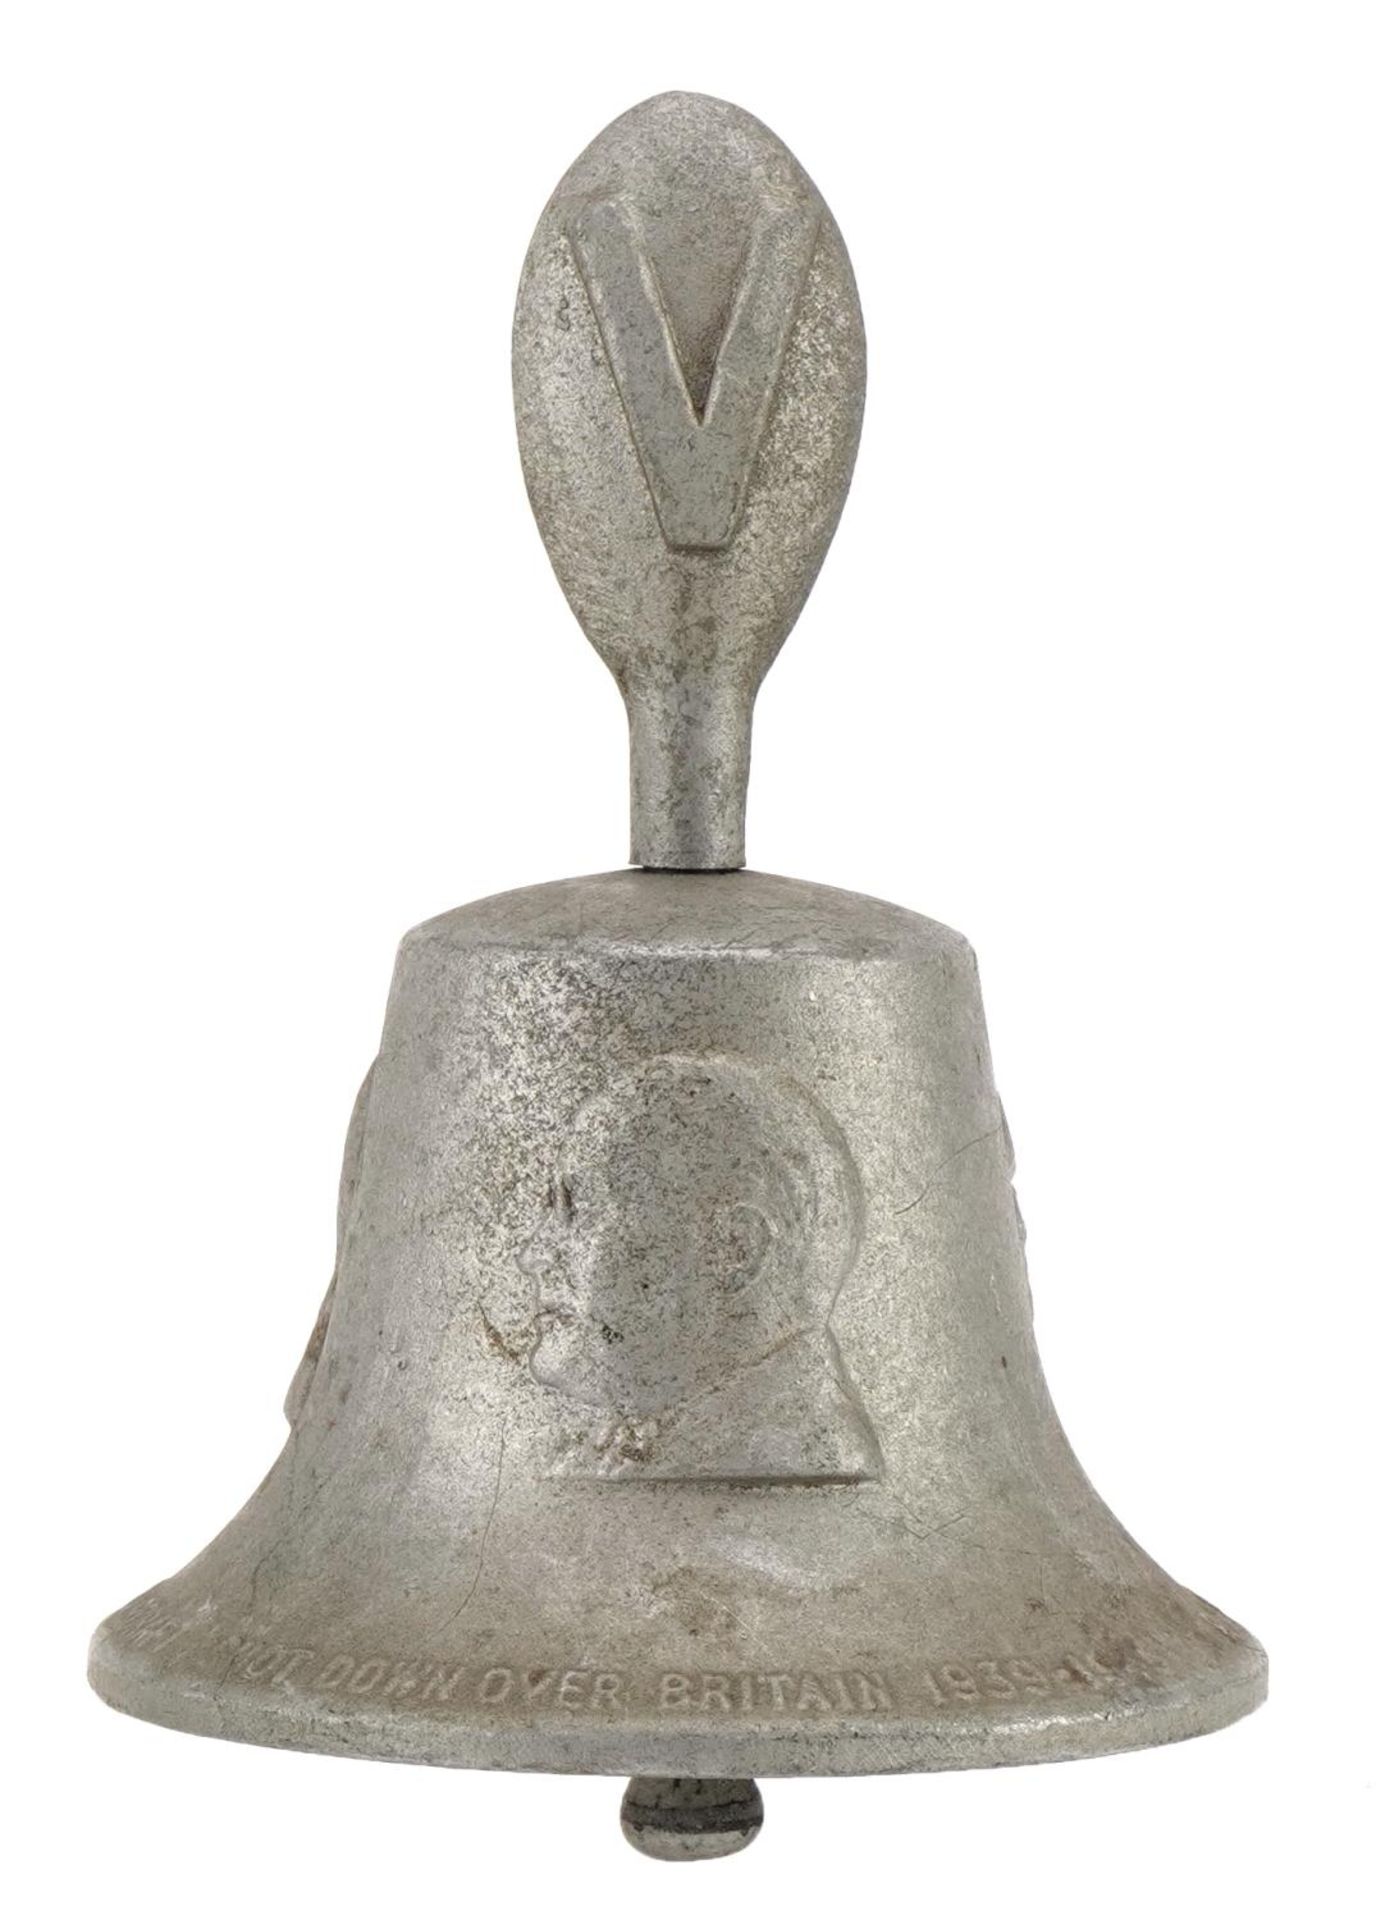 Military interest bell cast with metal from a German aircraft shot down over Britain 1939-1945, 15cm